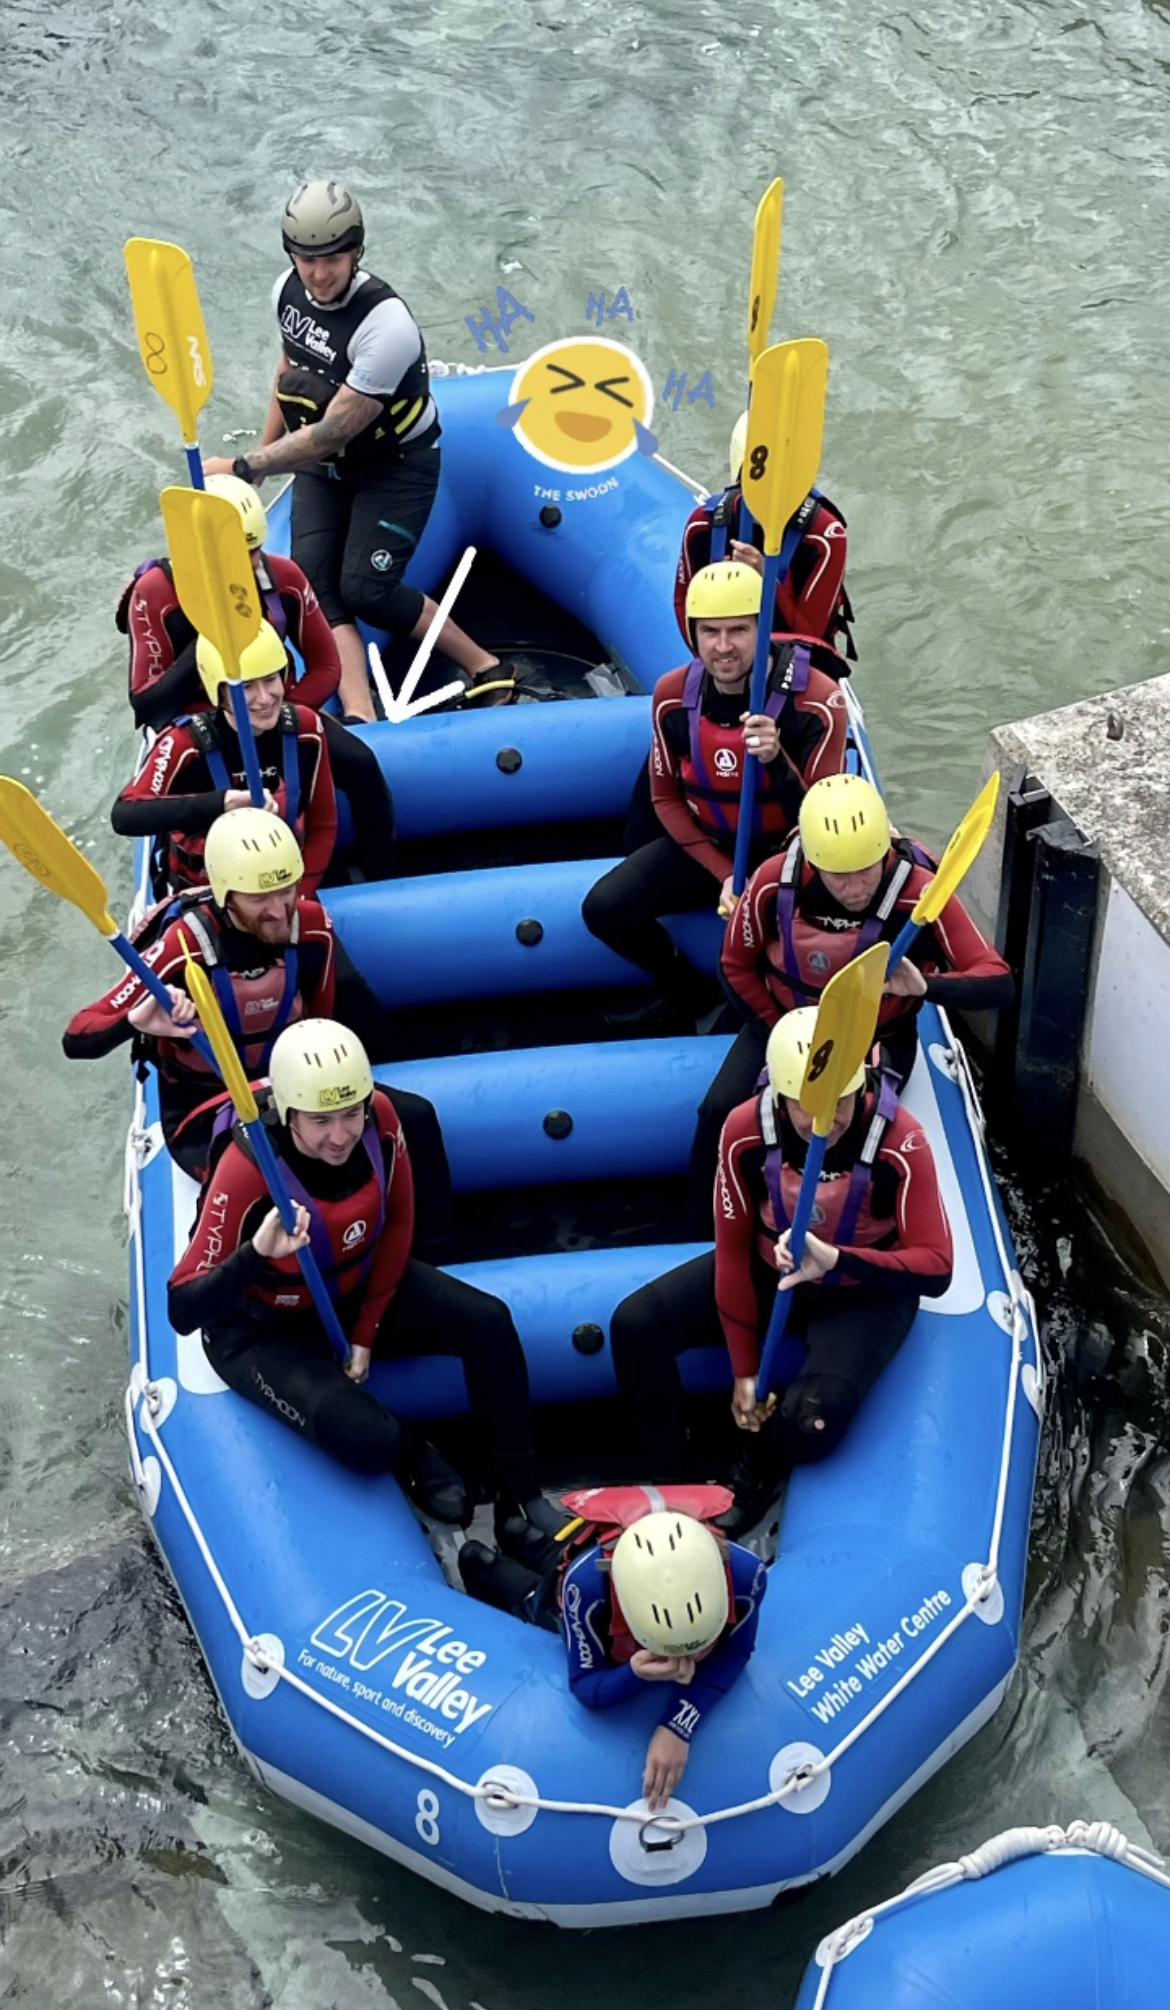 White water rafting at Lee Valley Water Centre, just outside Hertfordshire